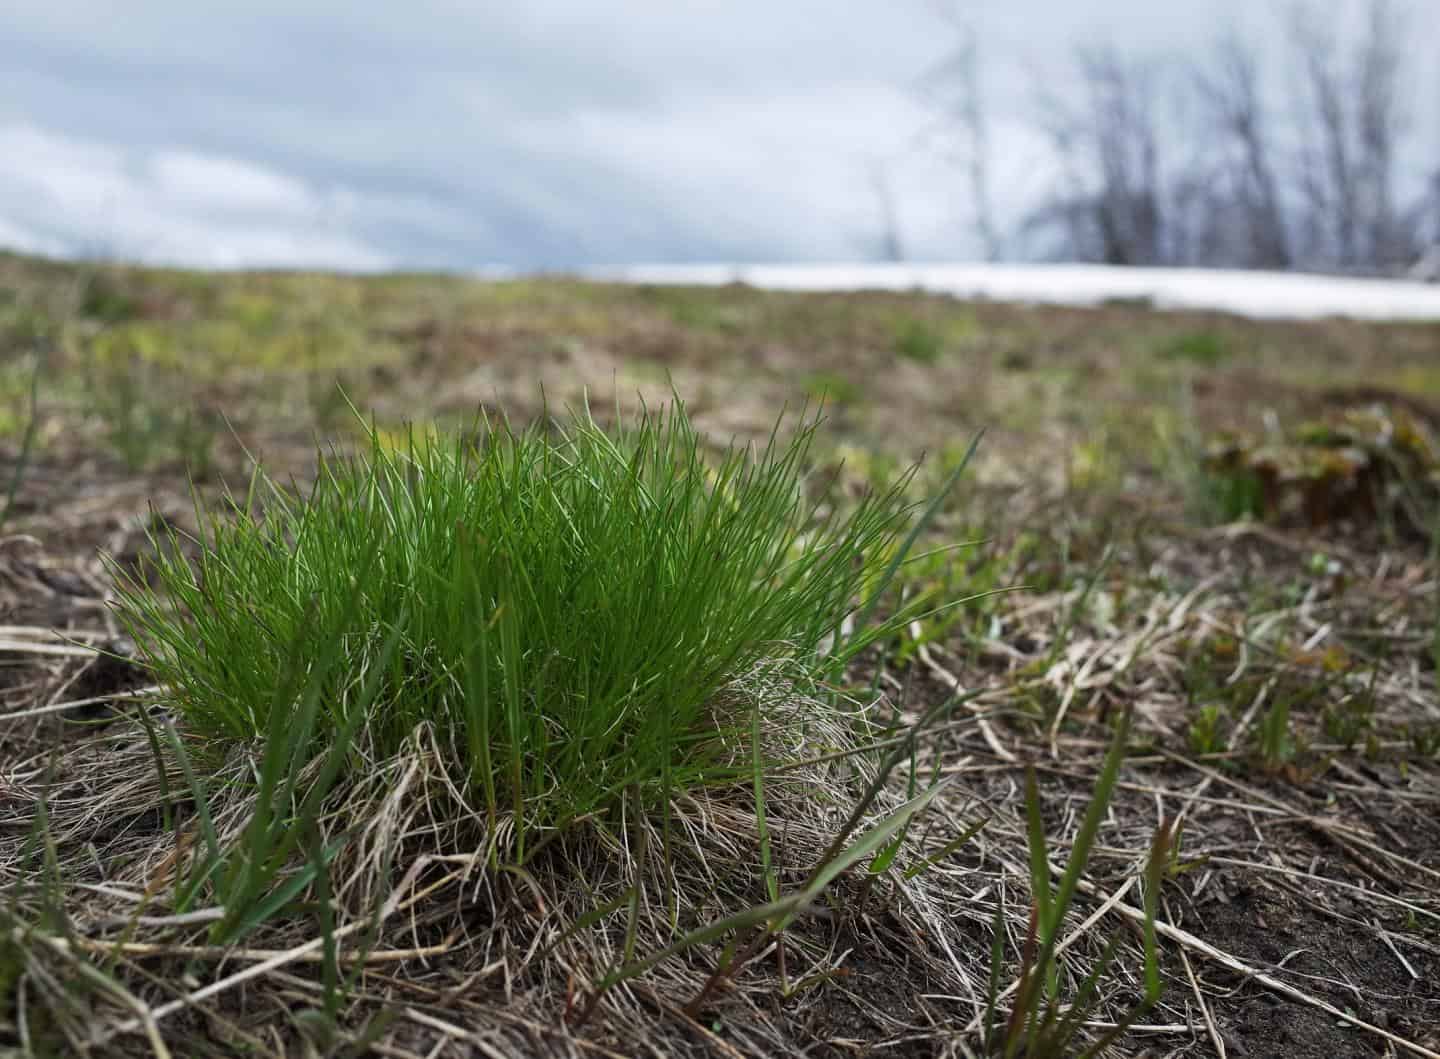 Newly emerging grass in western Wyoming’s Gros Ventre drainage is an example of the high-quality forage that big game wildlife eat while “surfing the green wave.” ©Jerod A. Merkle